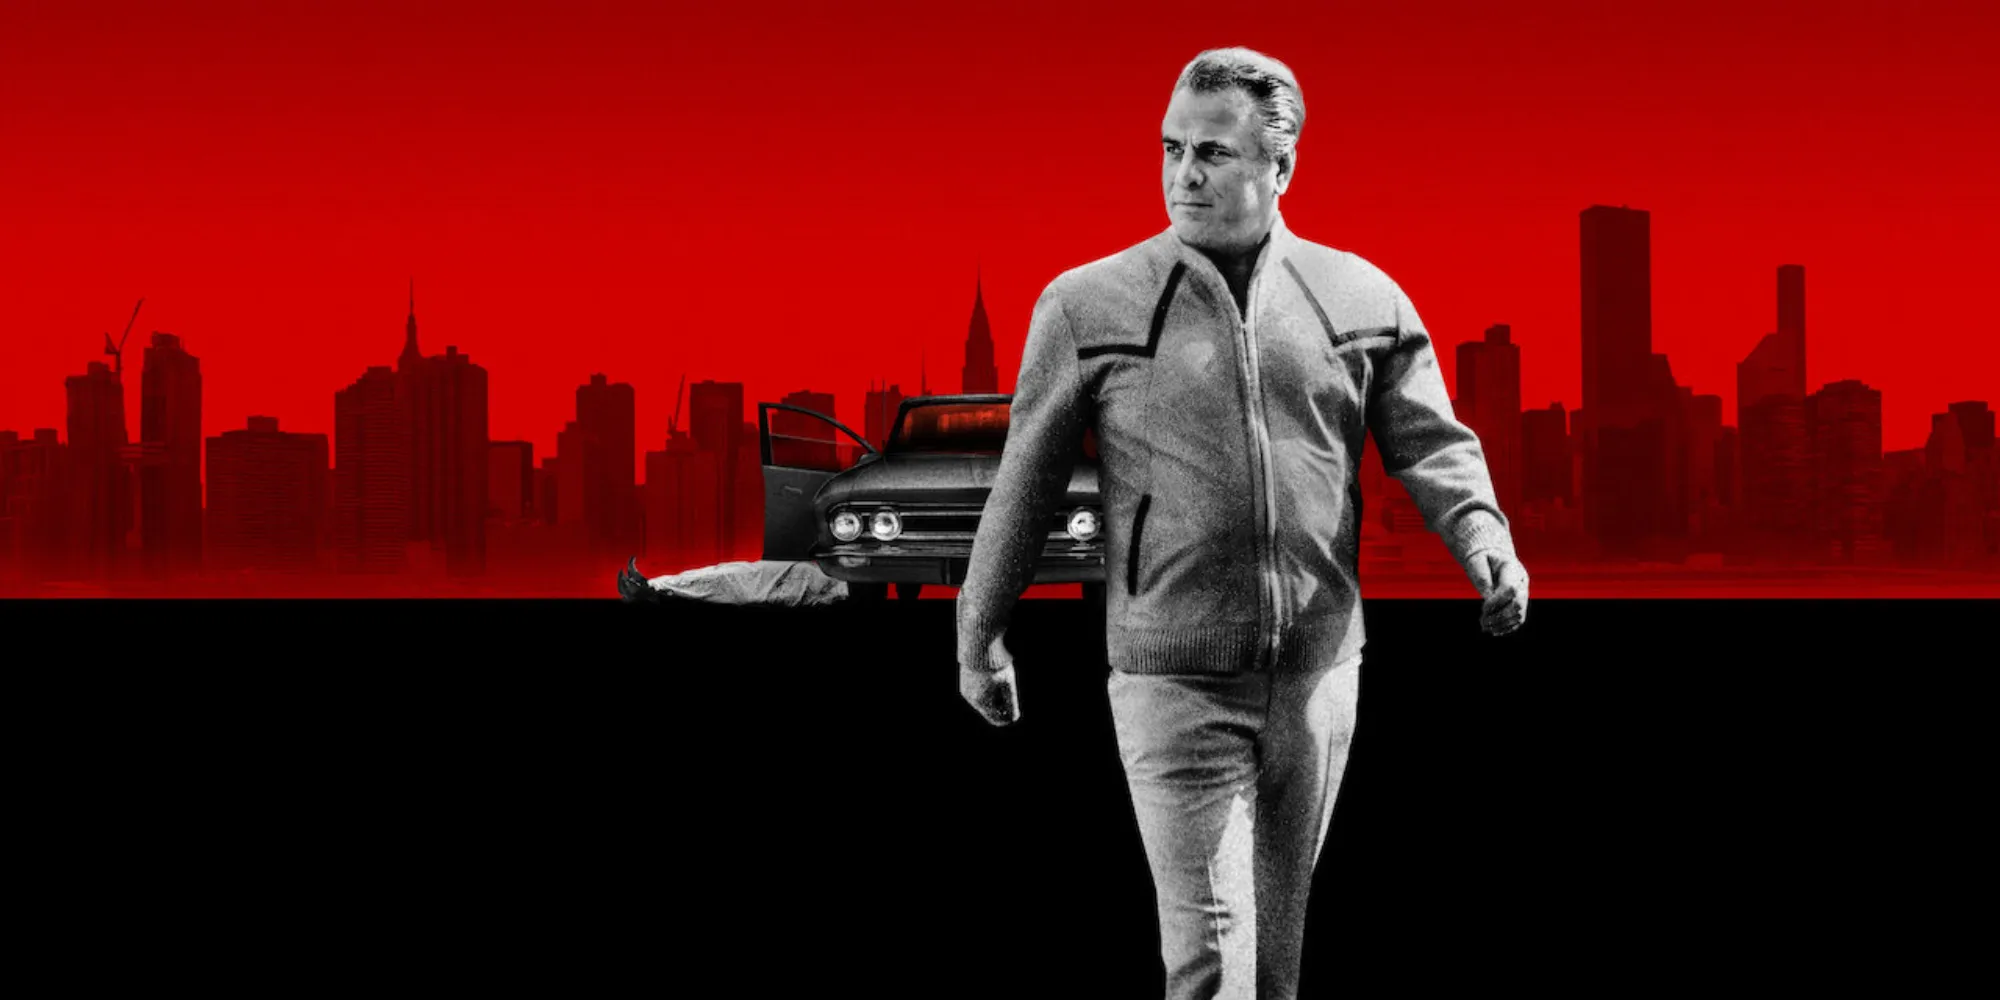 John Gotti on a red background of New York City